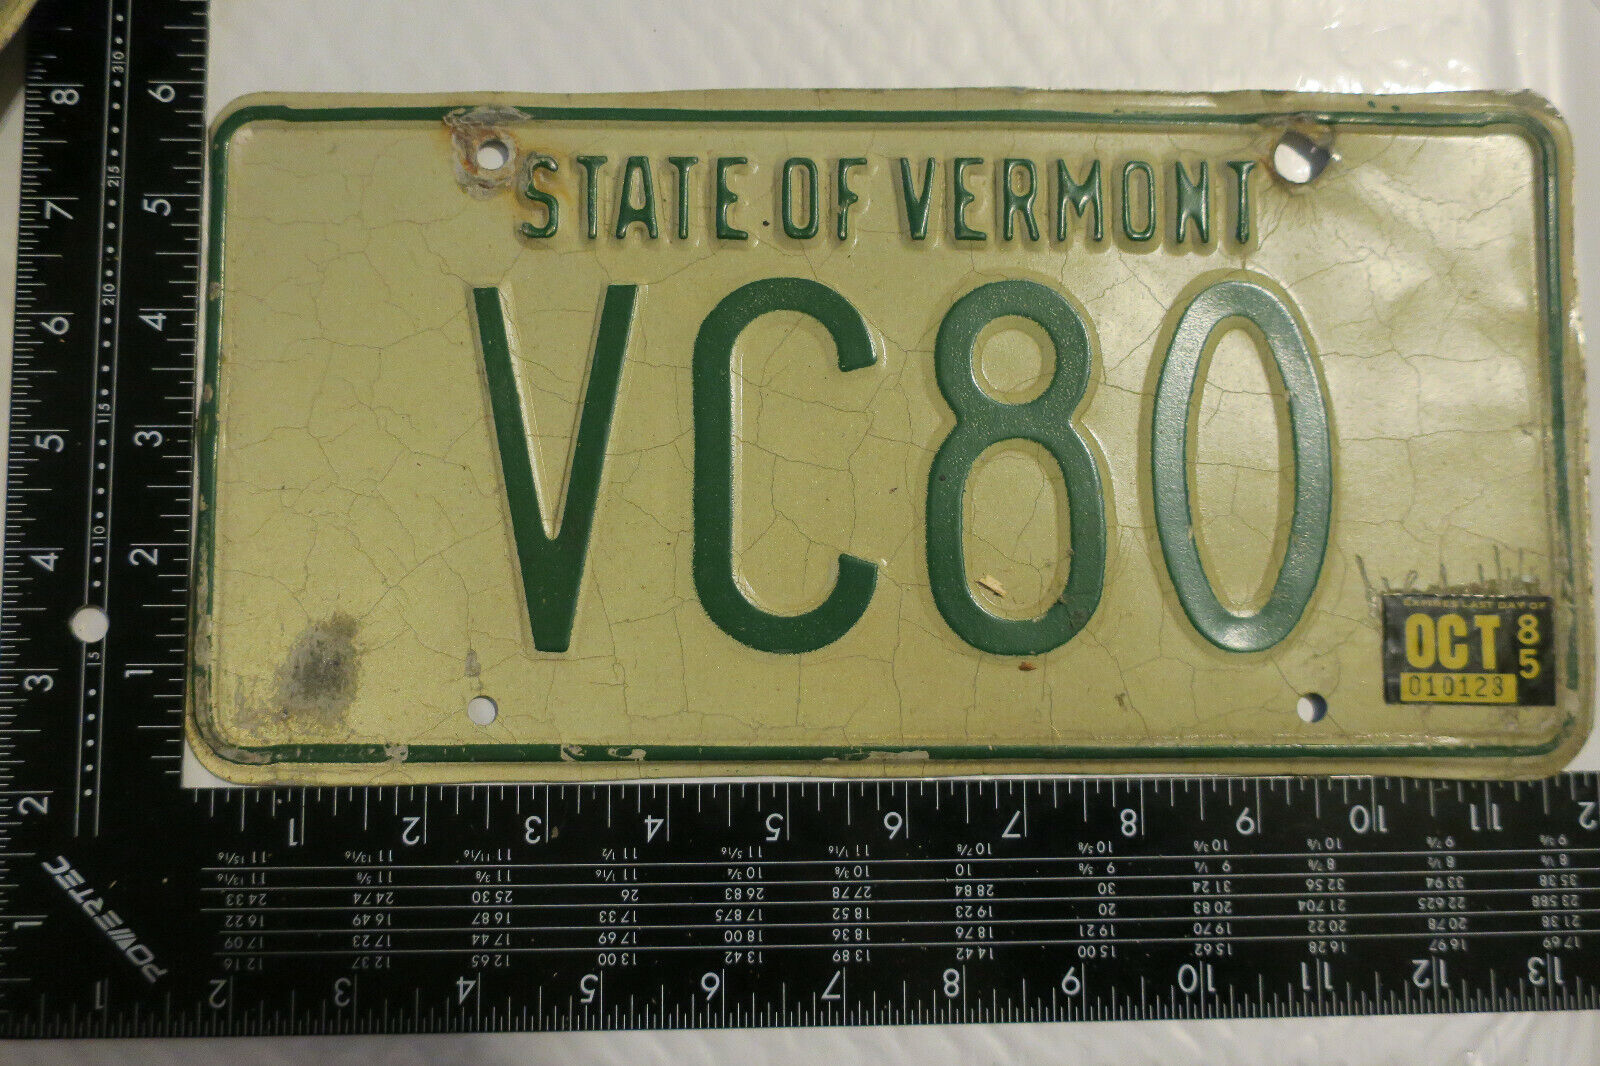 1985 85 Vermont Vt State Of Vermont College License Plate #vc80 Vc 80